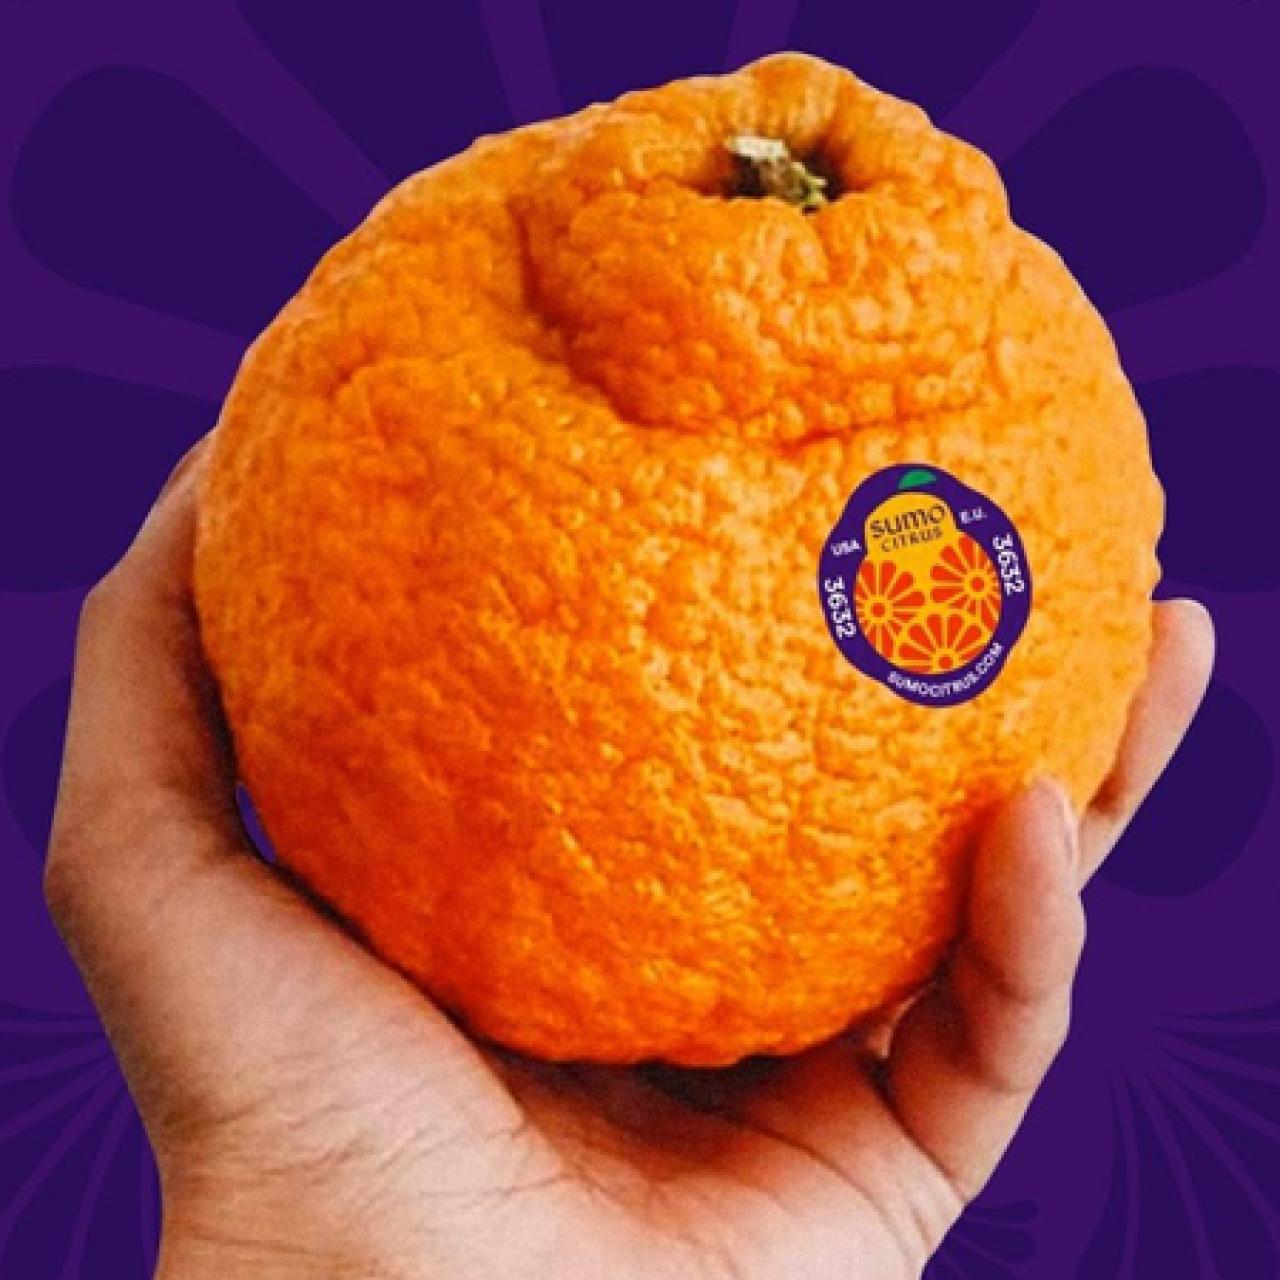 Sumo Oranges Are in Season Again, So Get Them While You Can